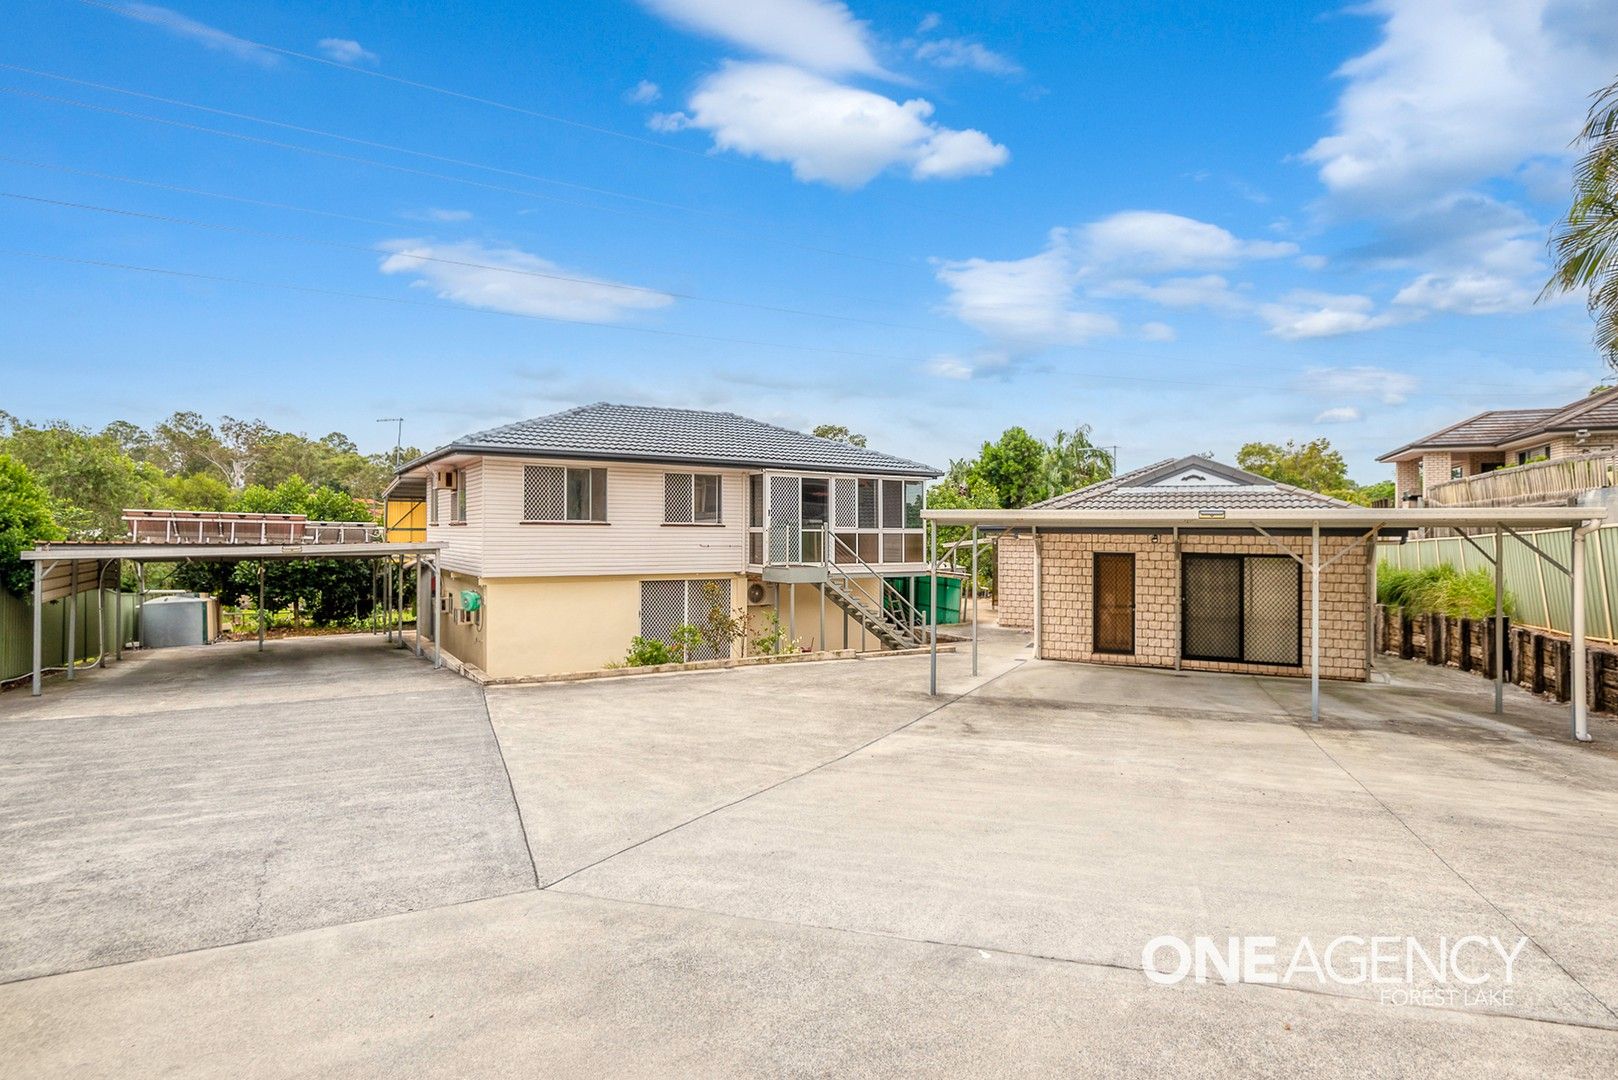 6 bedrooms House in 14 Coomaroo St DURACK QLD, 4077